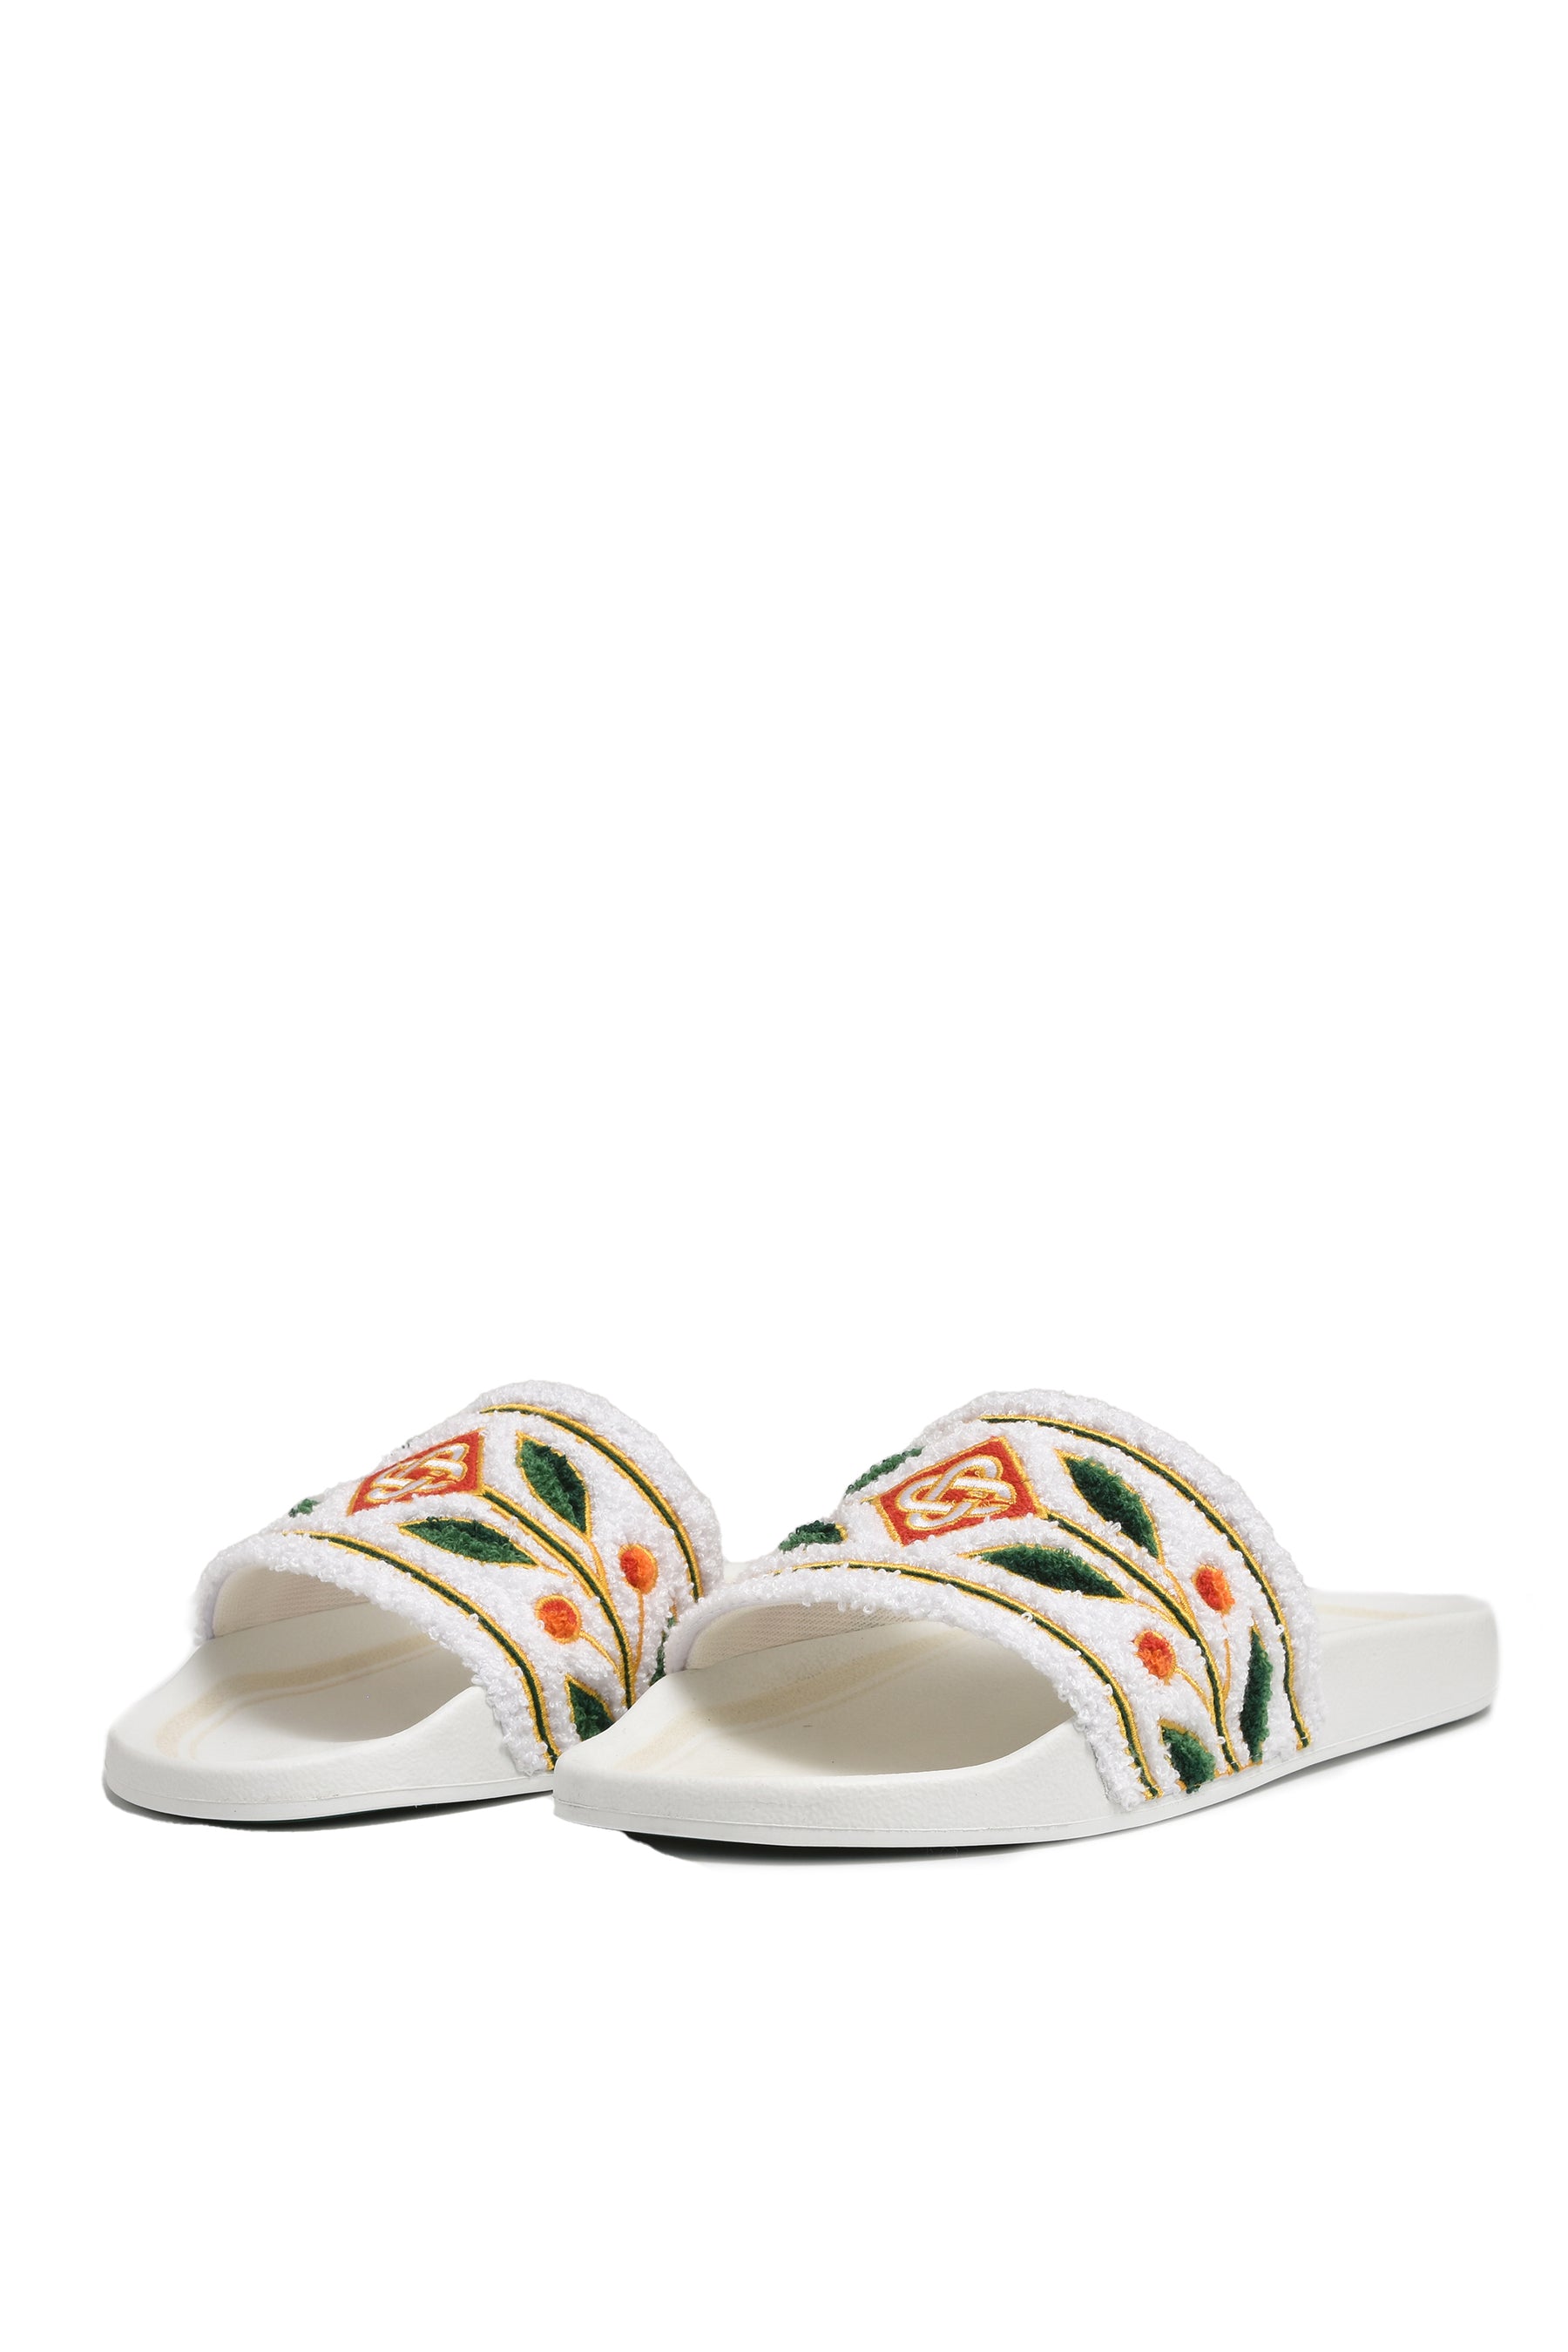 EMBROIDERED TERRY SLIDER / WHT